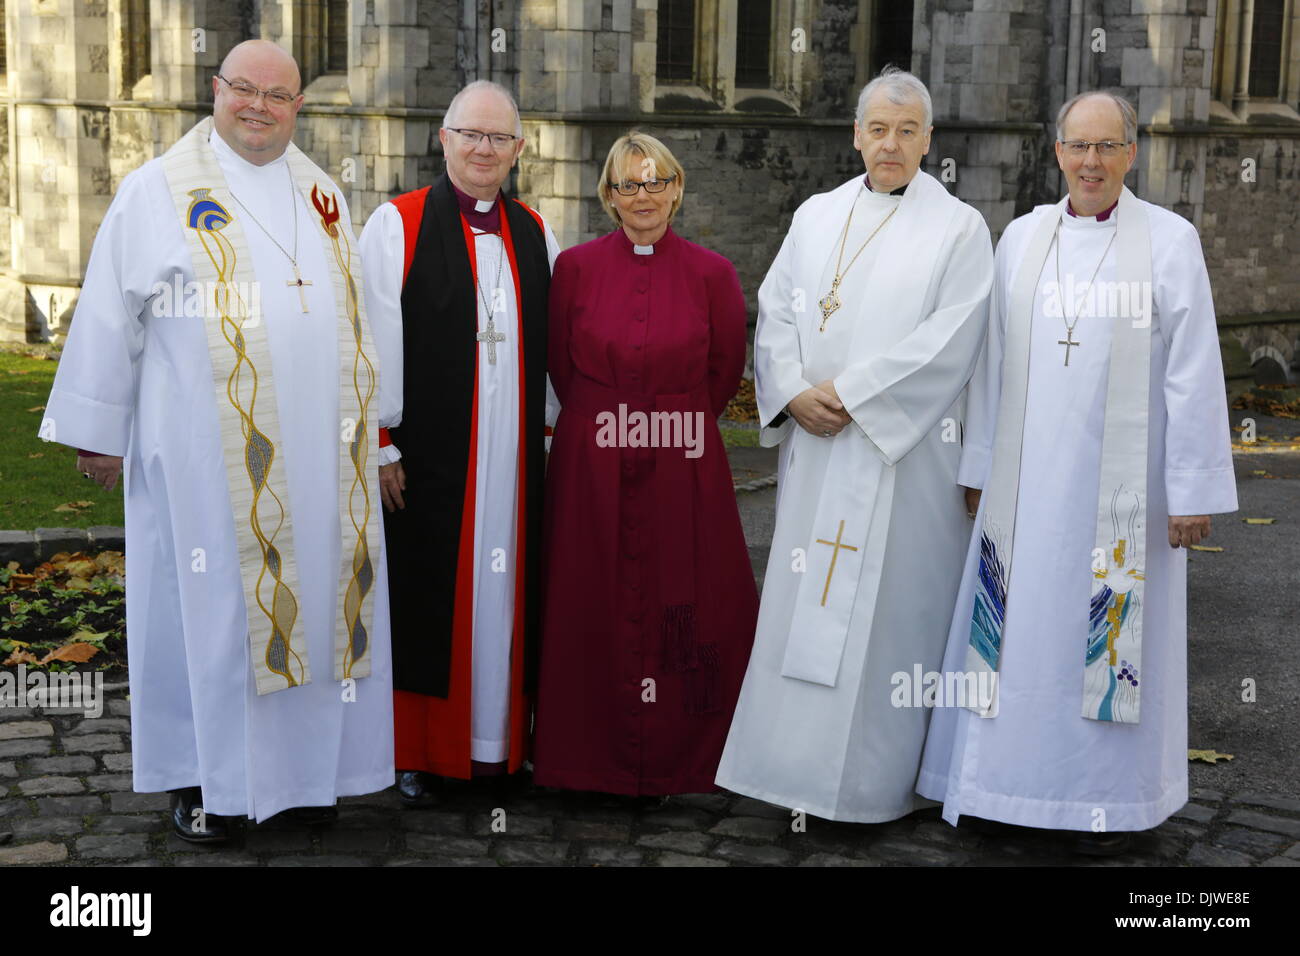 Dublin, Ireland. 30th November 2013. The bishop-elect the Revd Pat Storey (M) is pictured with the Bishop of Cork, Cloyne and Ross, The Right Revd Paul Colton (L), the Archbishop of Armagh, the Most Revd Richard Clarke (2 L), the Archbishop of Dublin, the Most Revd Dr Michael Jackson (2 R) and Bishop of Derry and the Raphoe, The Right Revd Ken Good (R) before the service.  The Most Revd Pat Storey has been consecrated as Church of Ireland Bishop of Meath and Kildare in Dublin's Christ Church Cathedral. She is the first female Bishop to be consecrated in any denomination in Ireland and the UK,  Stock Photo